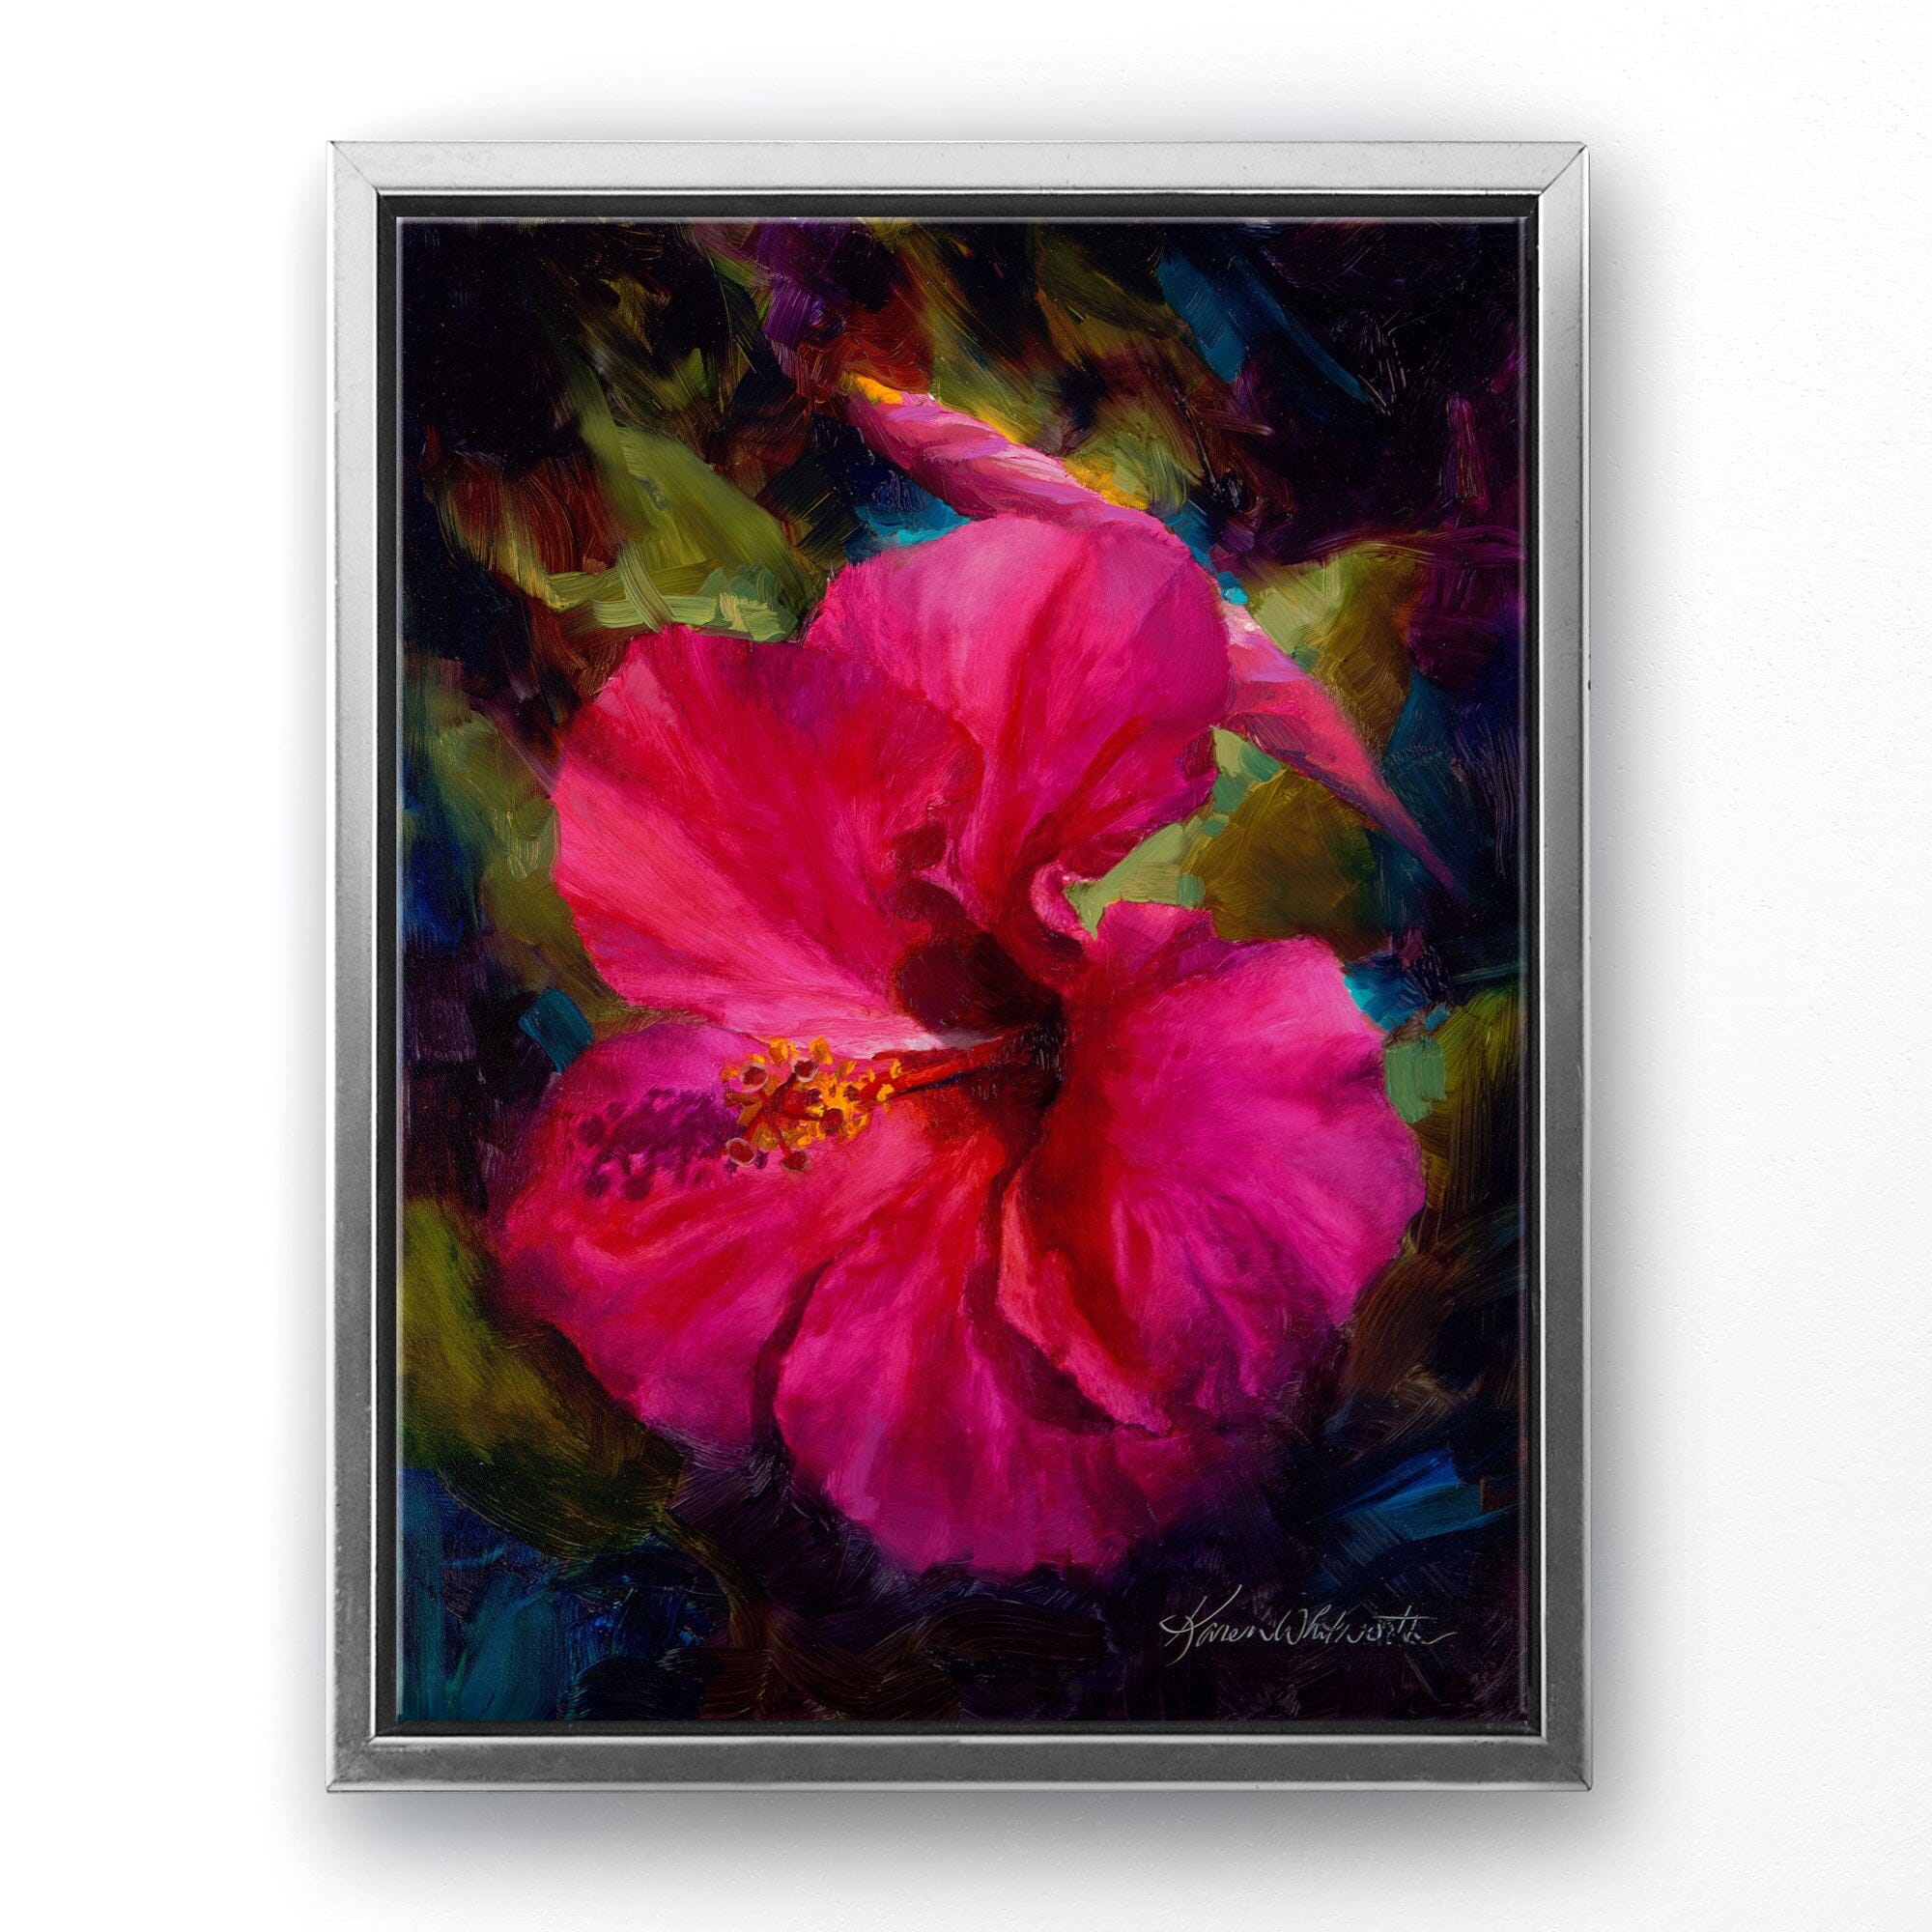 Hawaiian Hibiscus canvas art of pink tropical flower painting by Karen Whitworth. The artwork is framed in a silver floater frame and is hanging on a white wall.